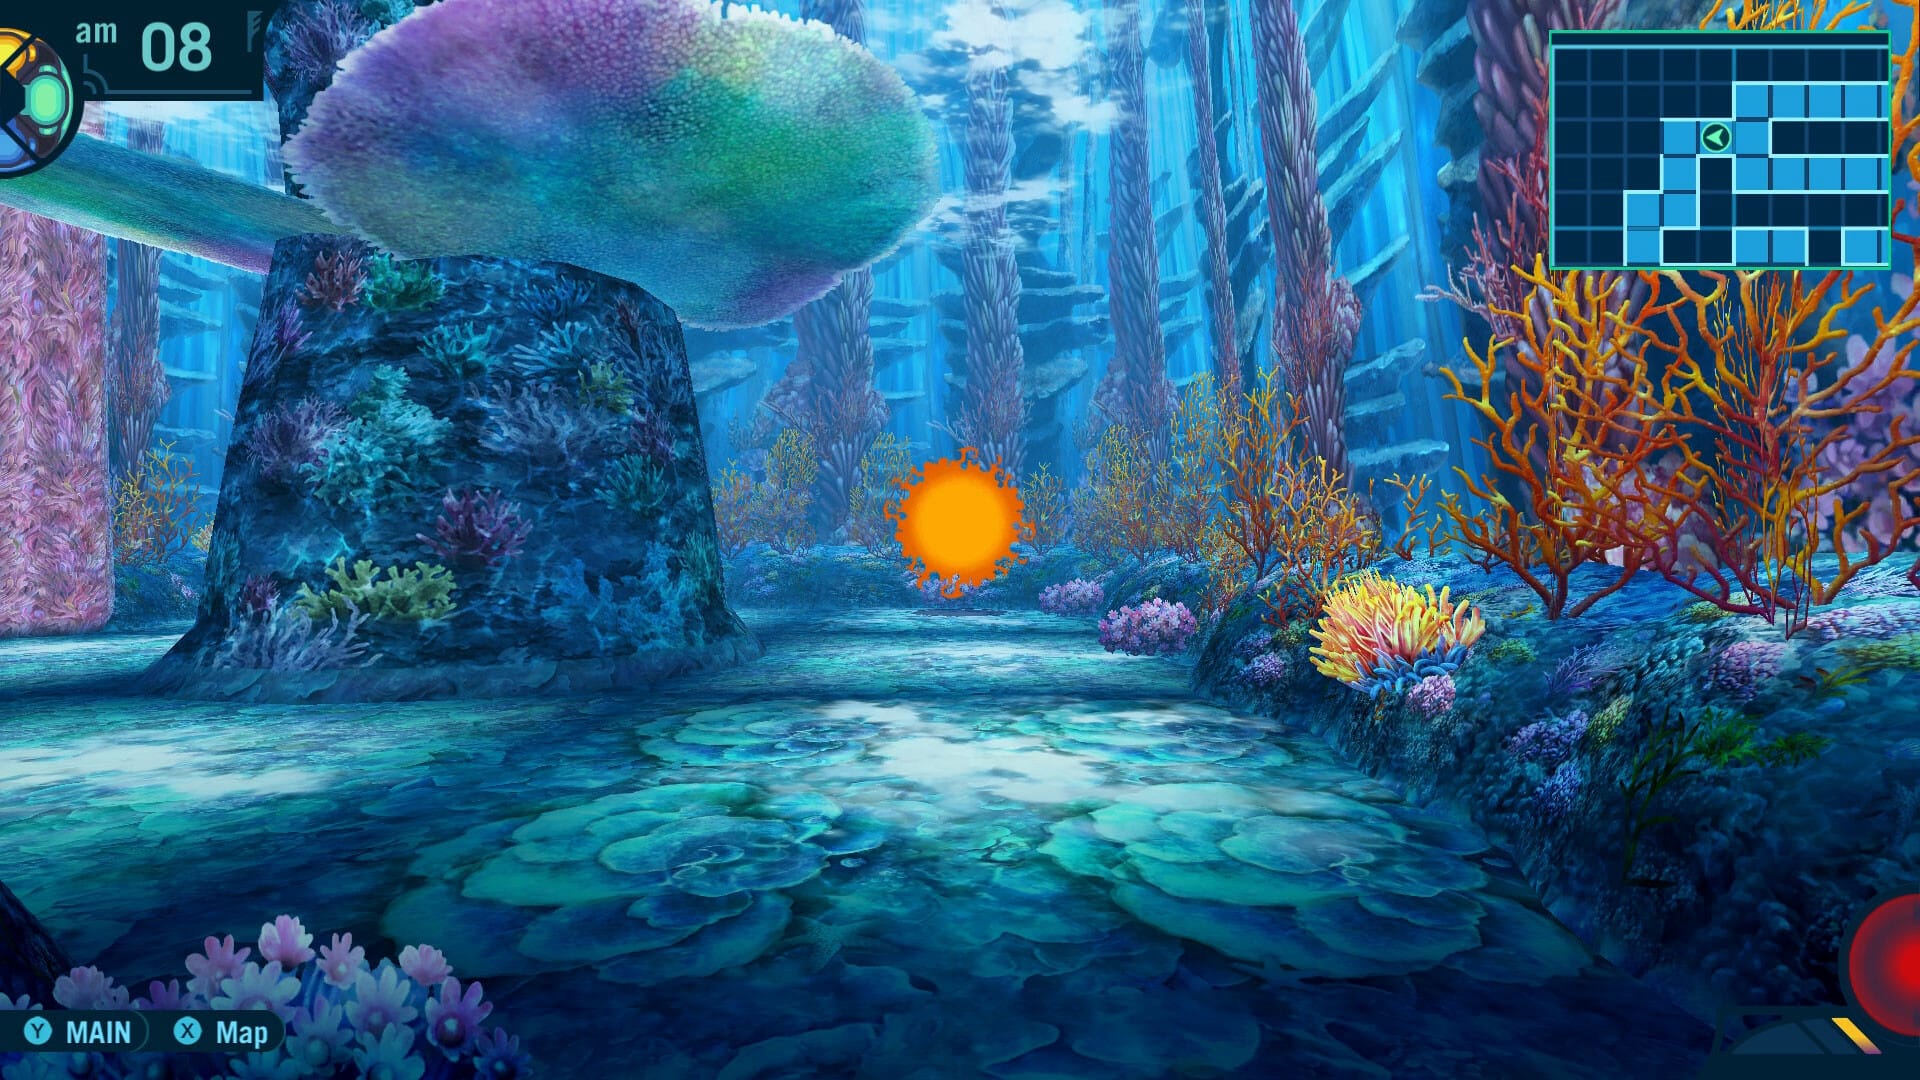 Image is a first person view of a vibrant ocean labyrinth with an orange ball mini boss nearby